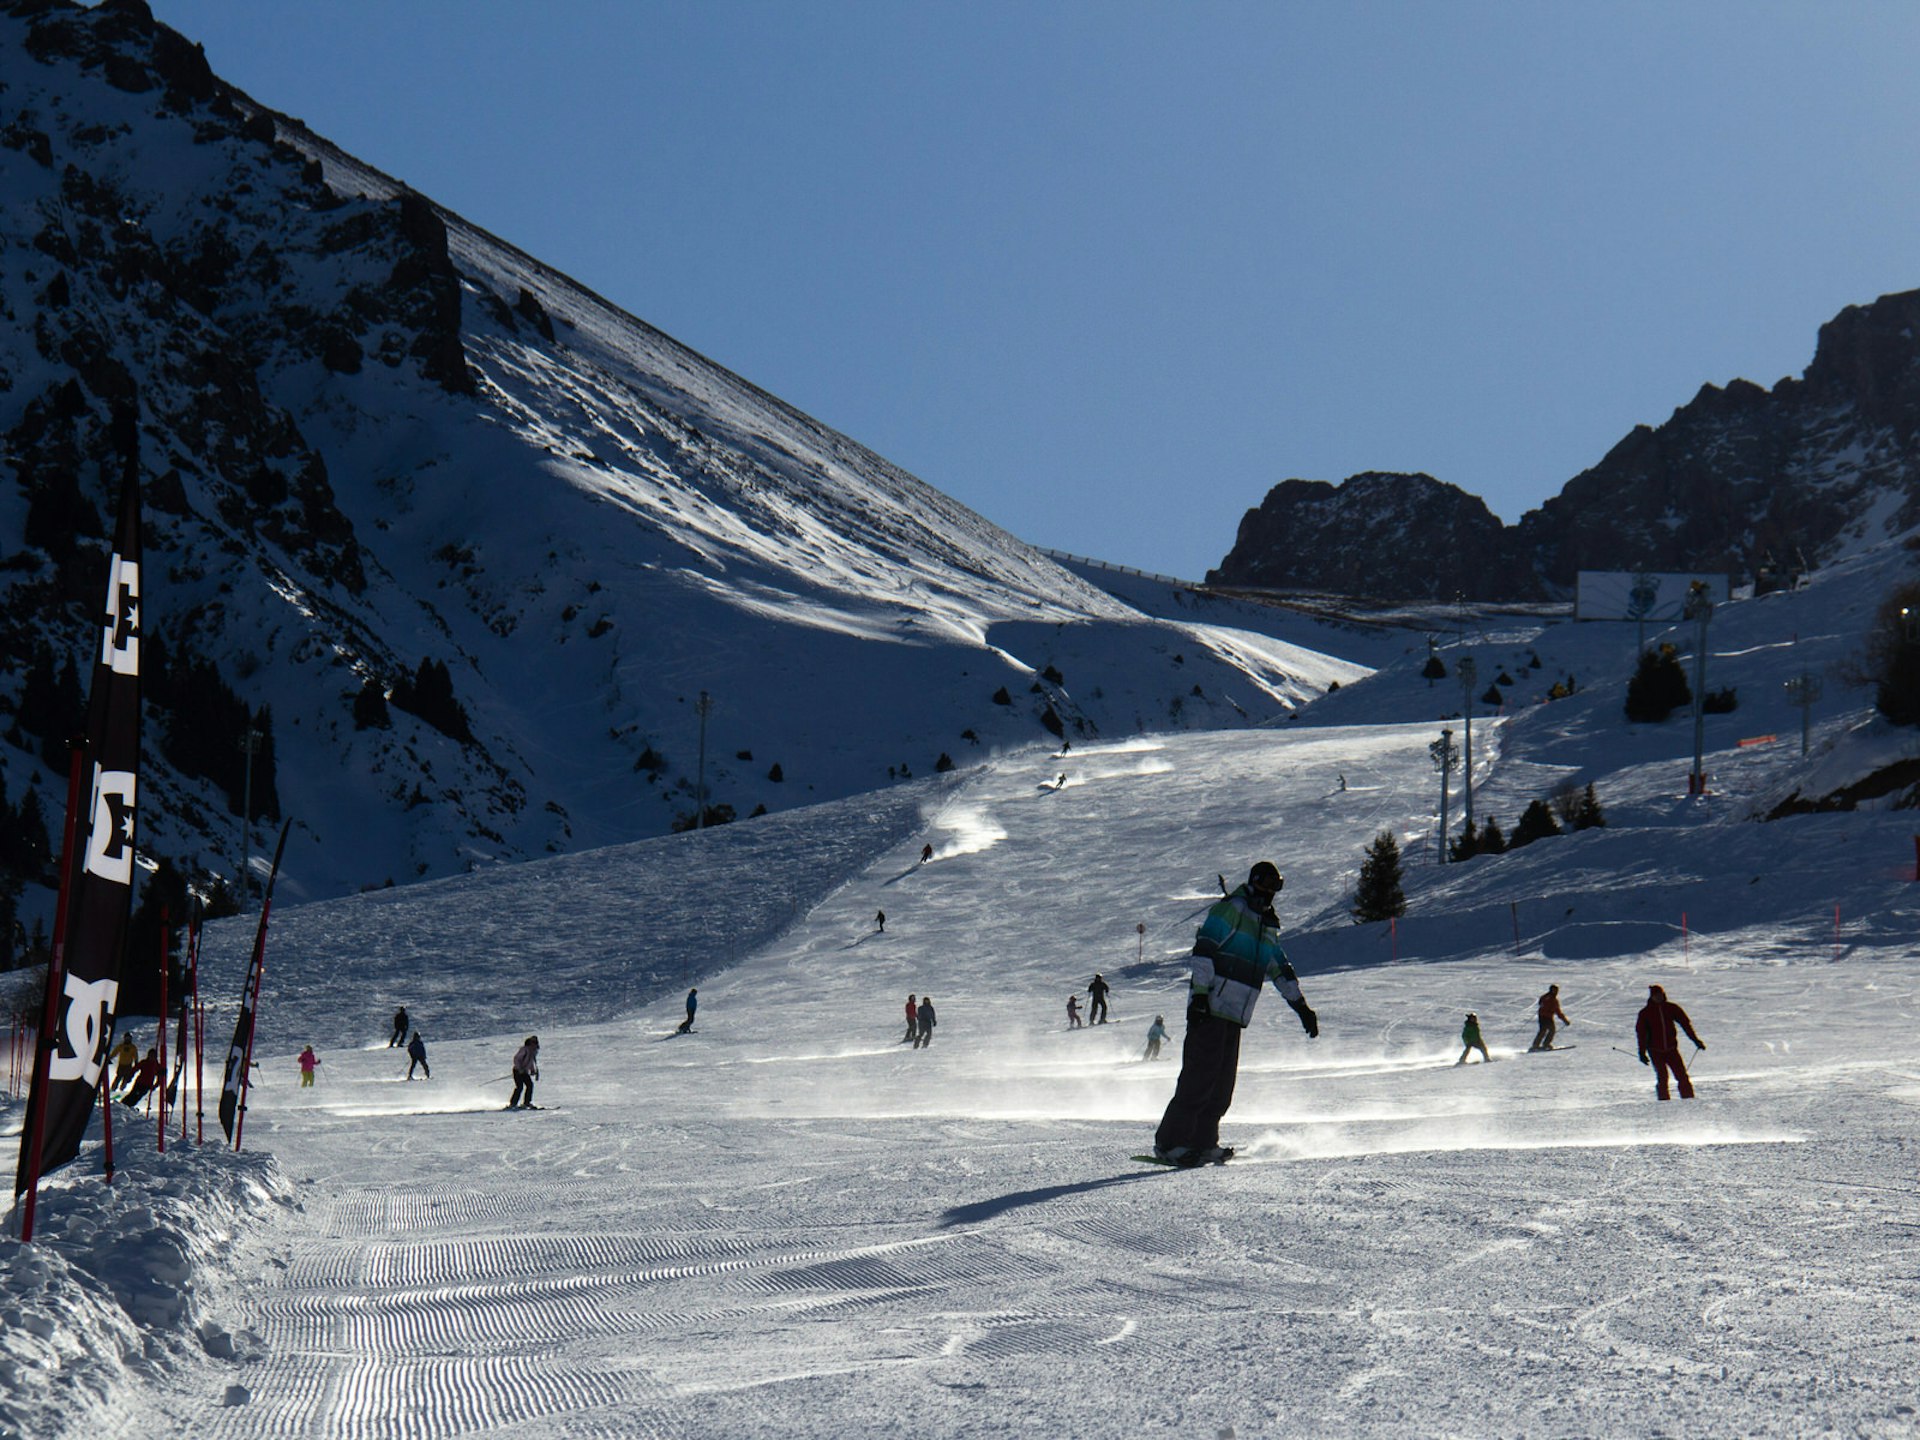 Skiers and snowboarders coasting down a snowy piste with blue sky in the background at Chimbulak Ski Resort near Almaty © Stephen Lioy / Lonely Planet